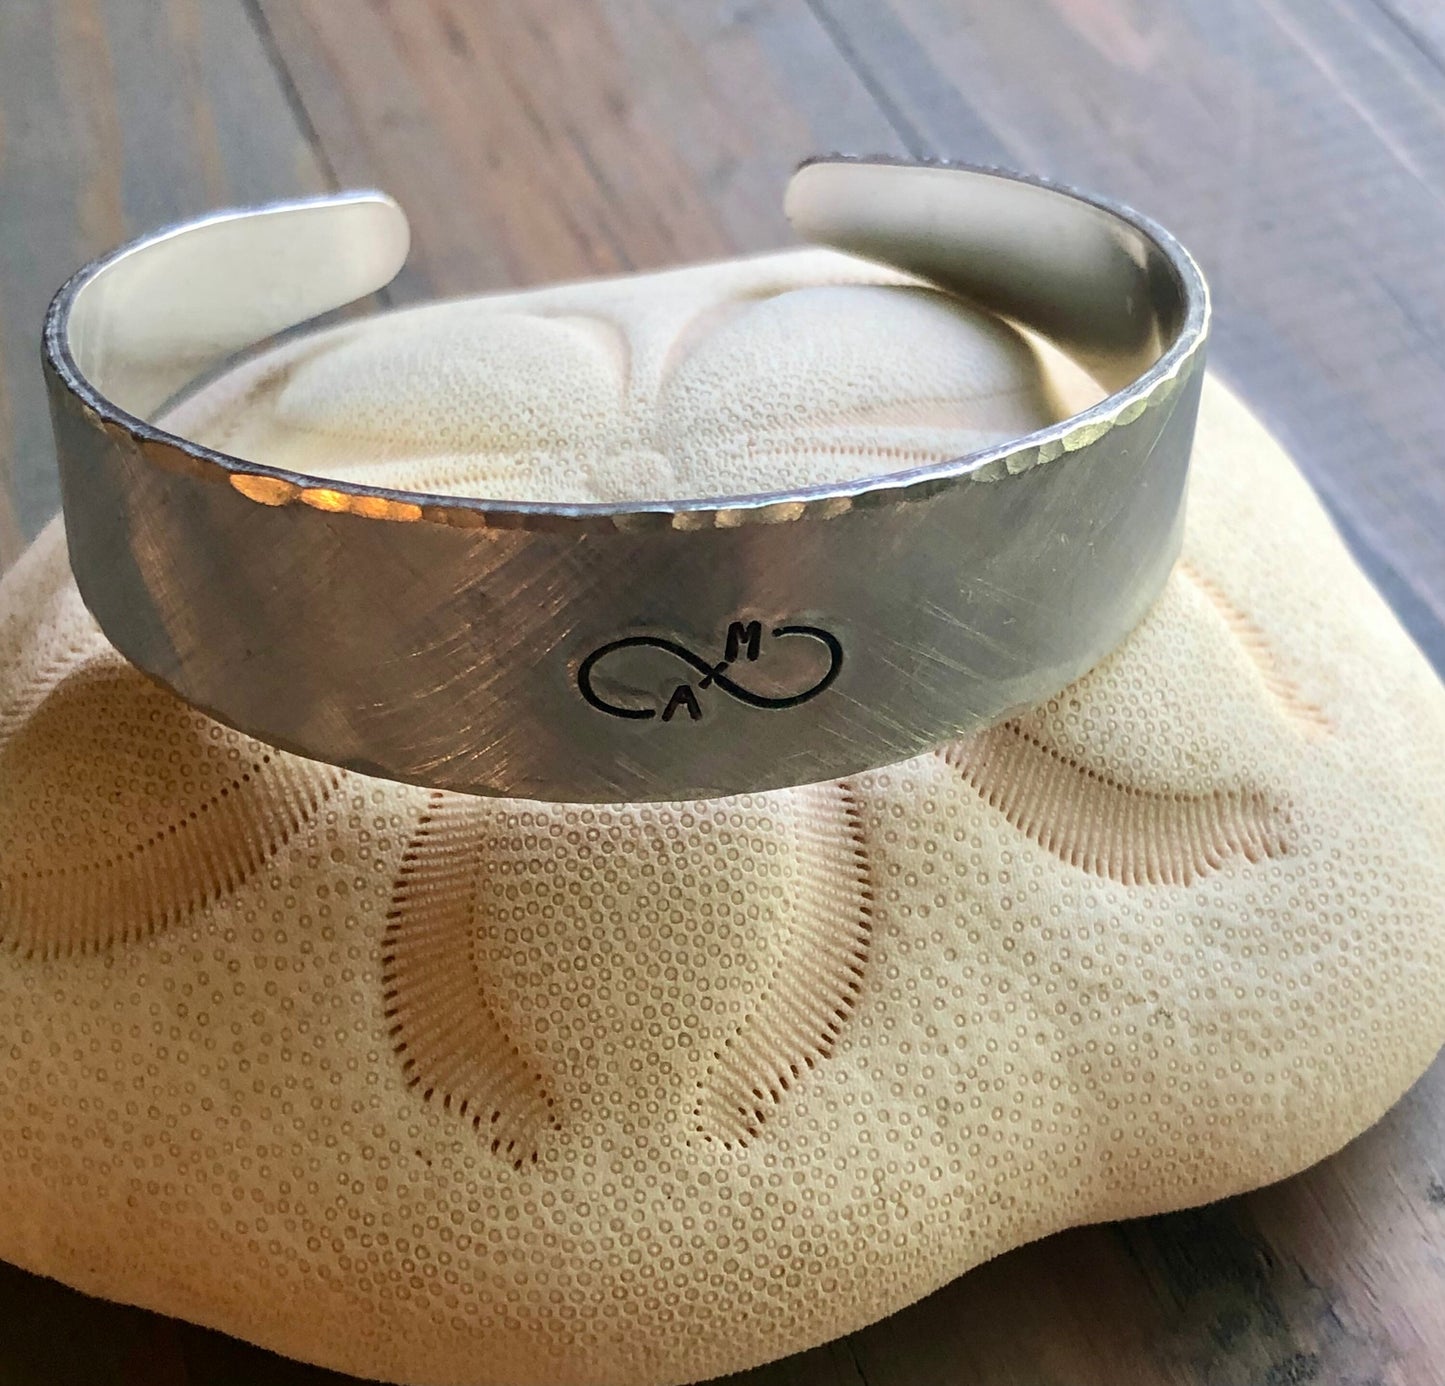 Silver Anniversary Bracelet - Jewelry for Anniversary - Infinity Sign w/Initials Cuff - gift for Girlfriend/Boyfriend with Initials